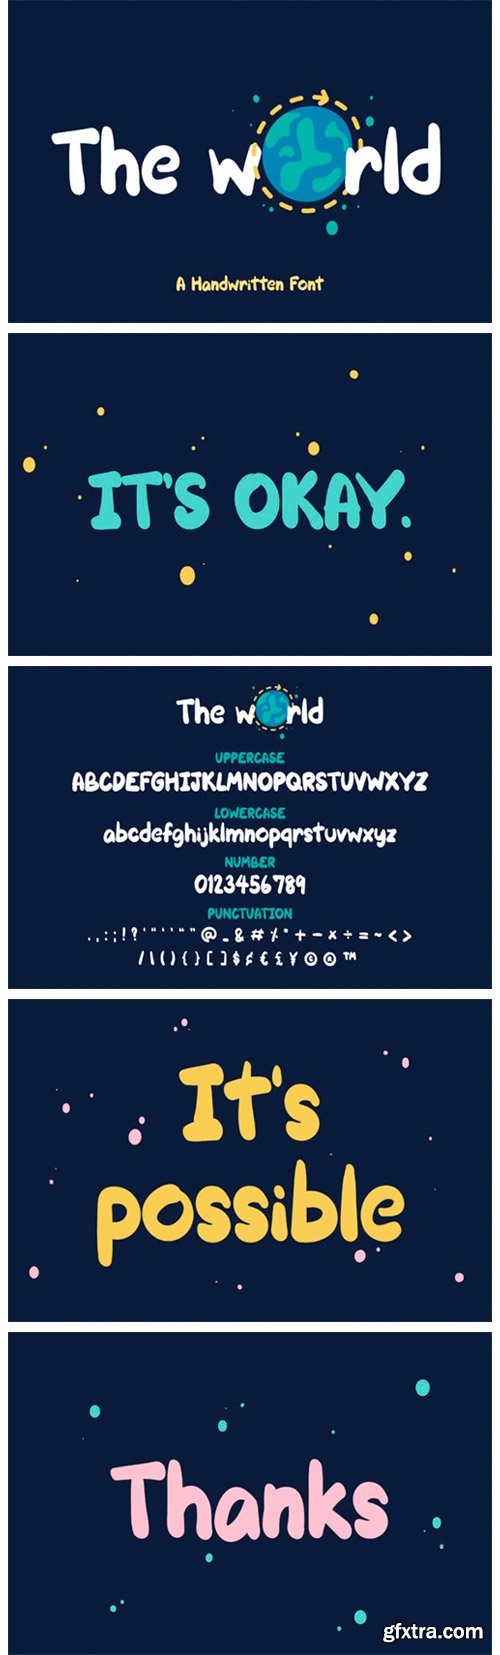 The World Font